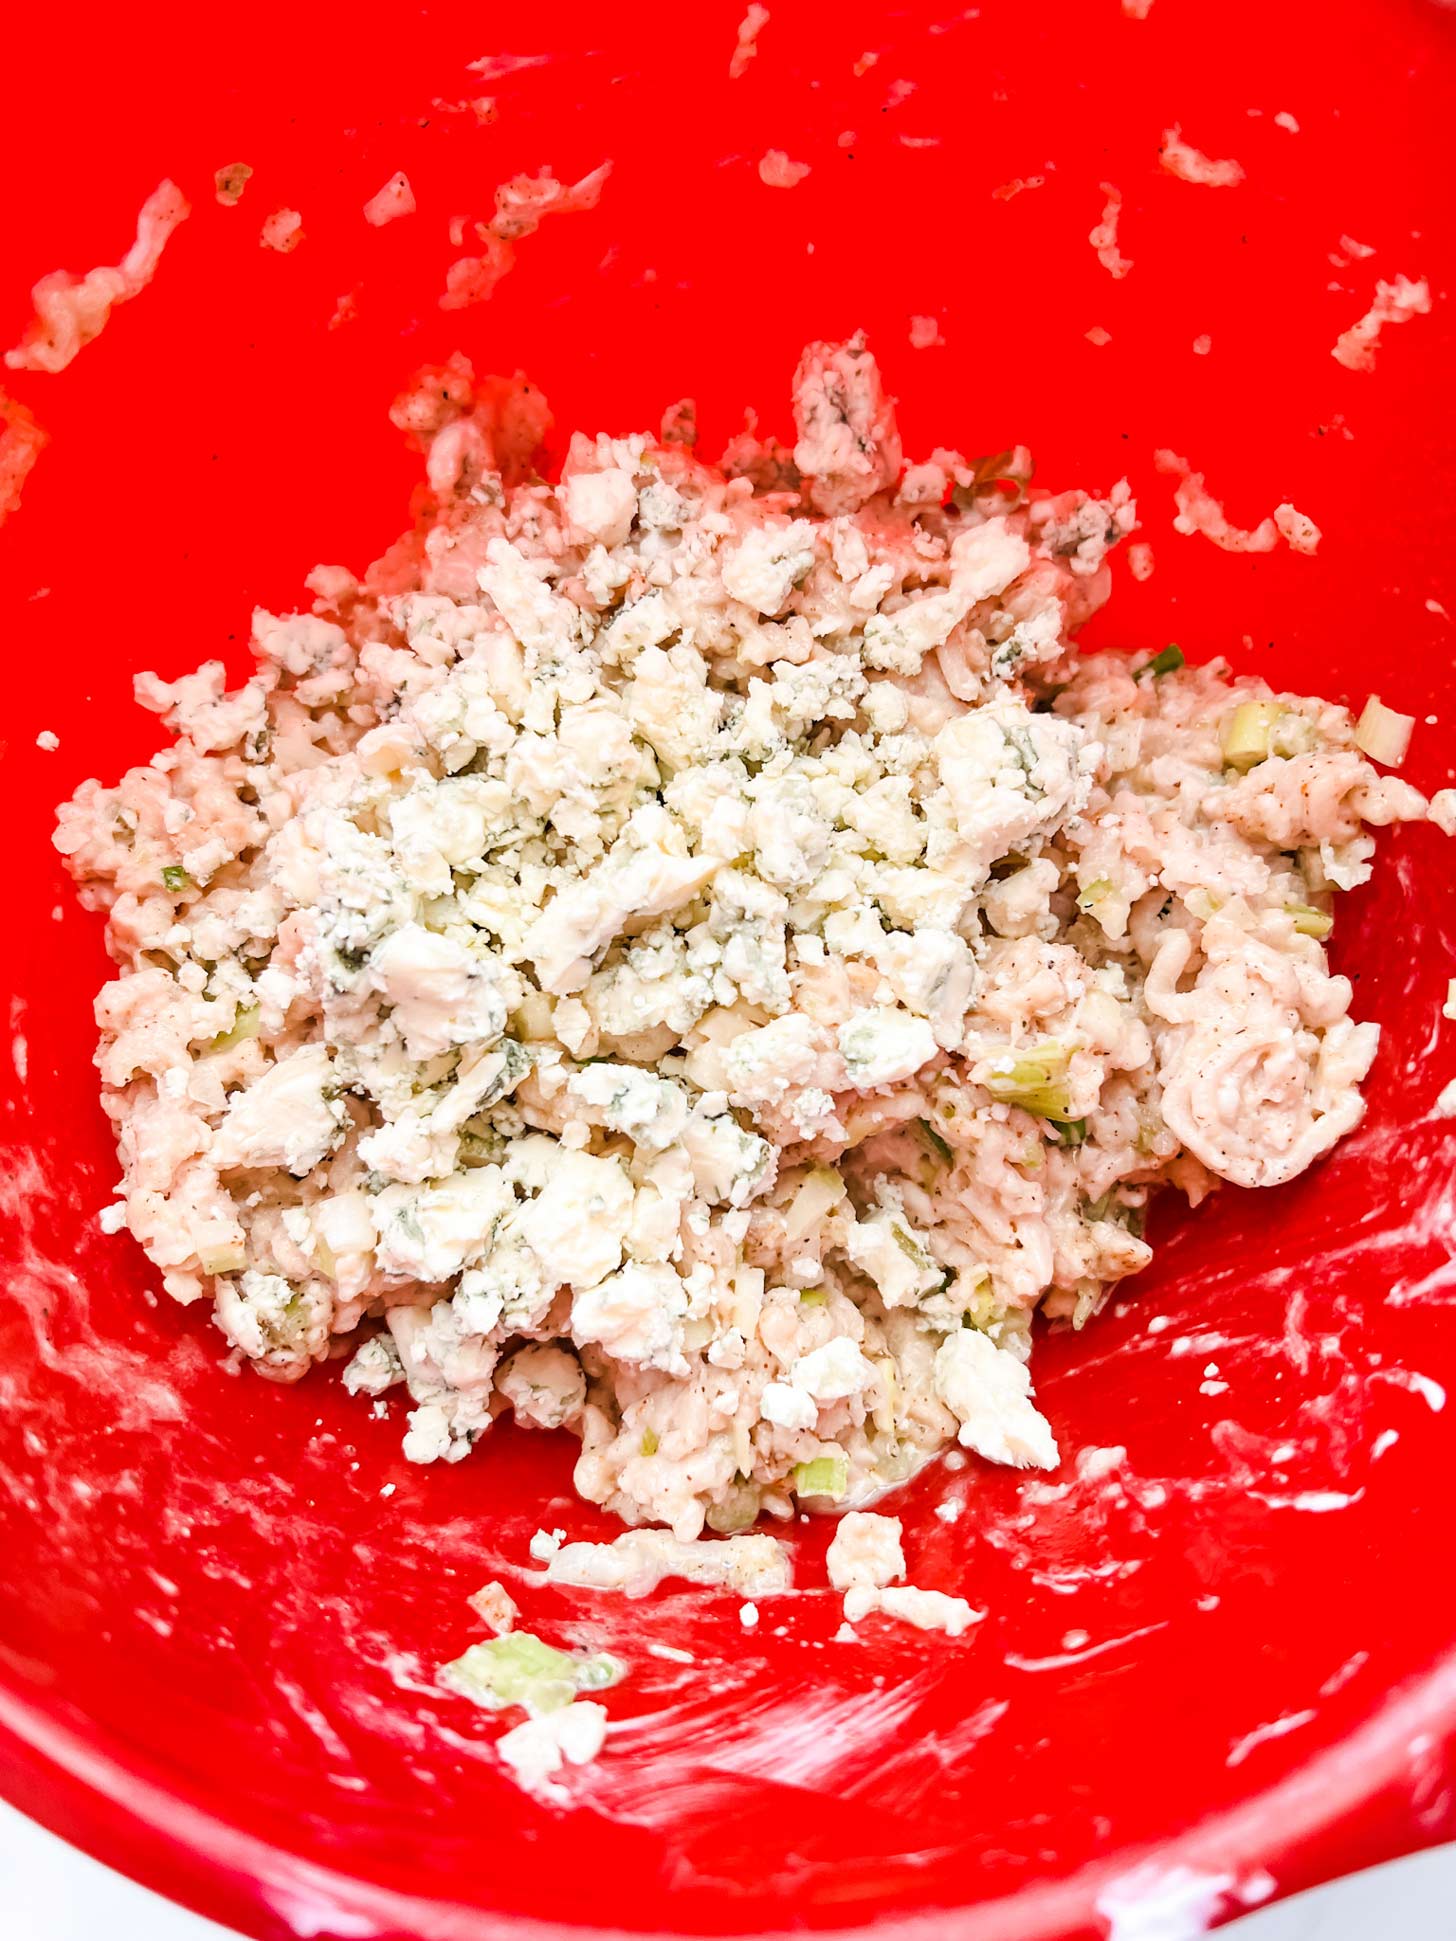 Blue cheese that has been just added to a ground chicken meatball mixture.